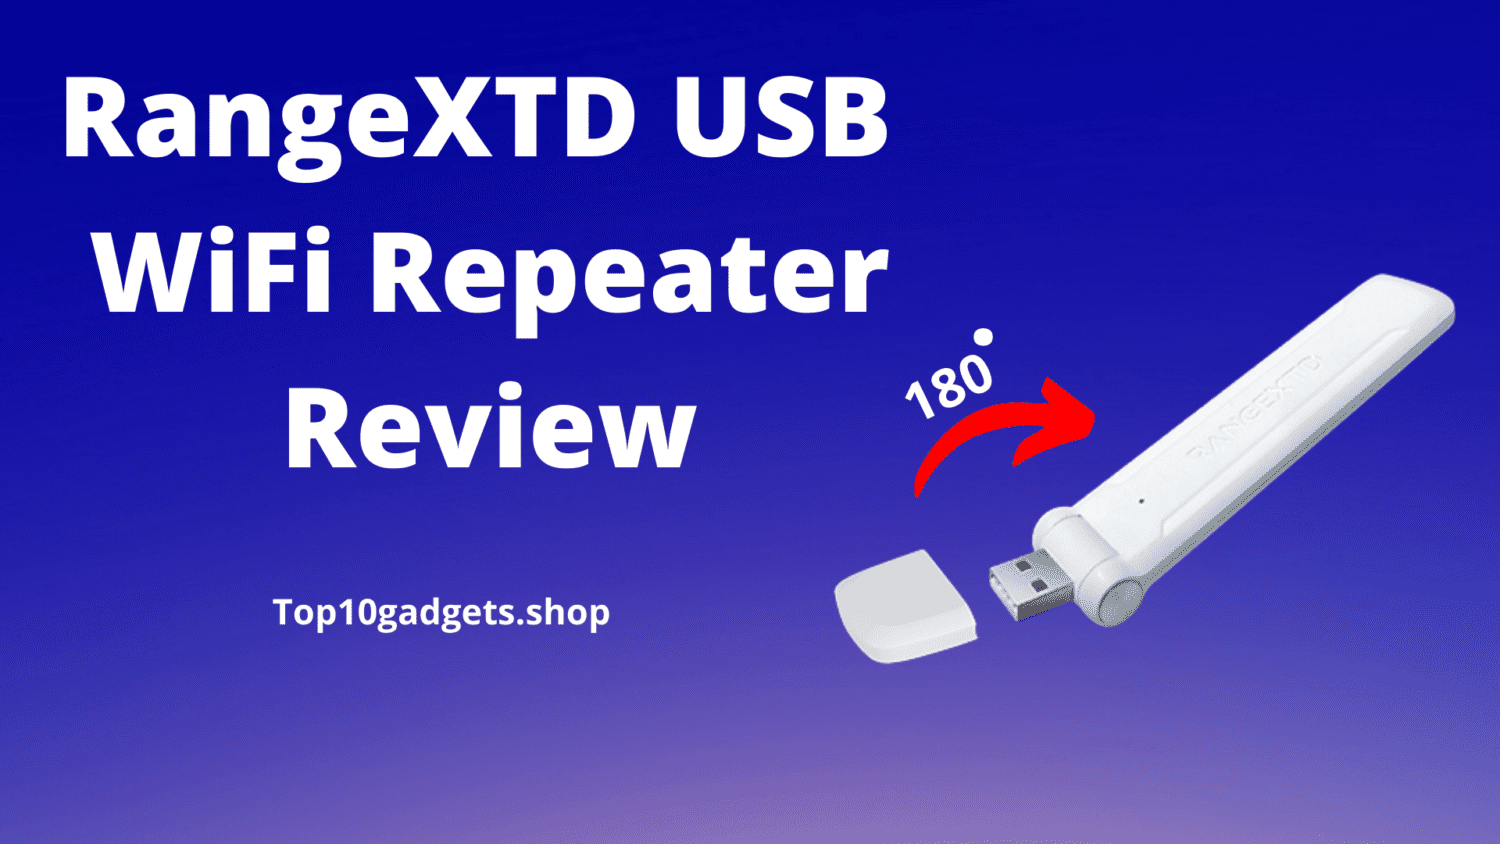 RangeXTD USB wifi repeater review-Does it really work?